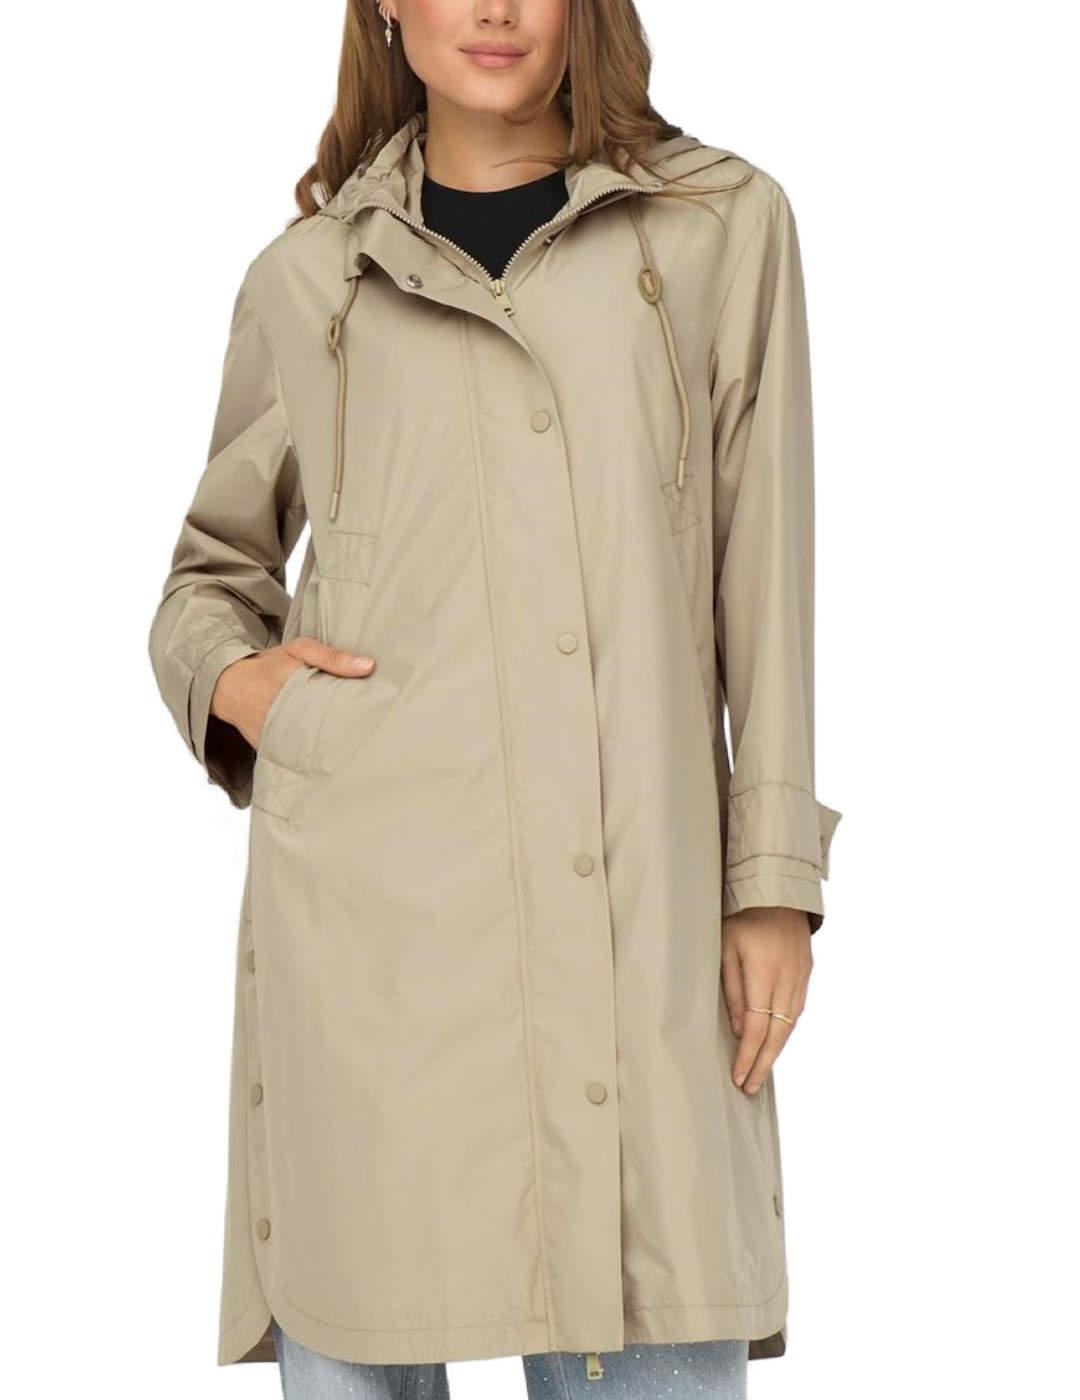 Parka Only Laugusta beige tipo gabardina con capucha mujer